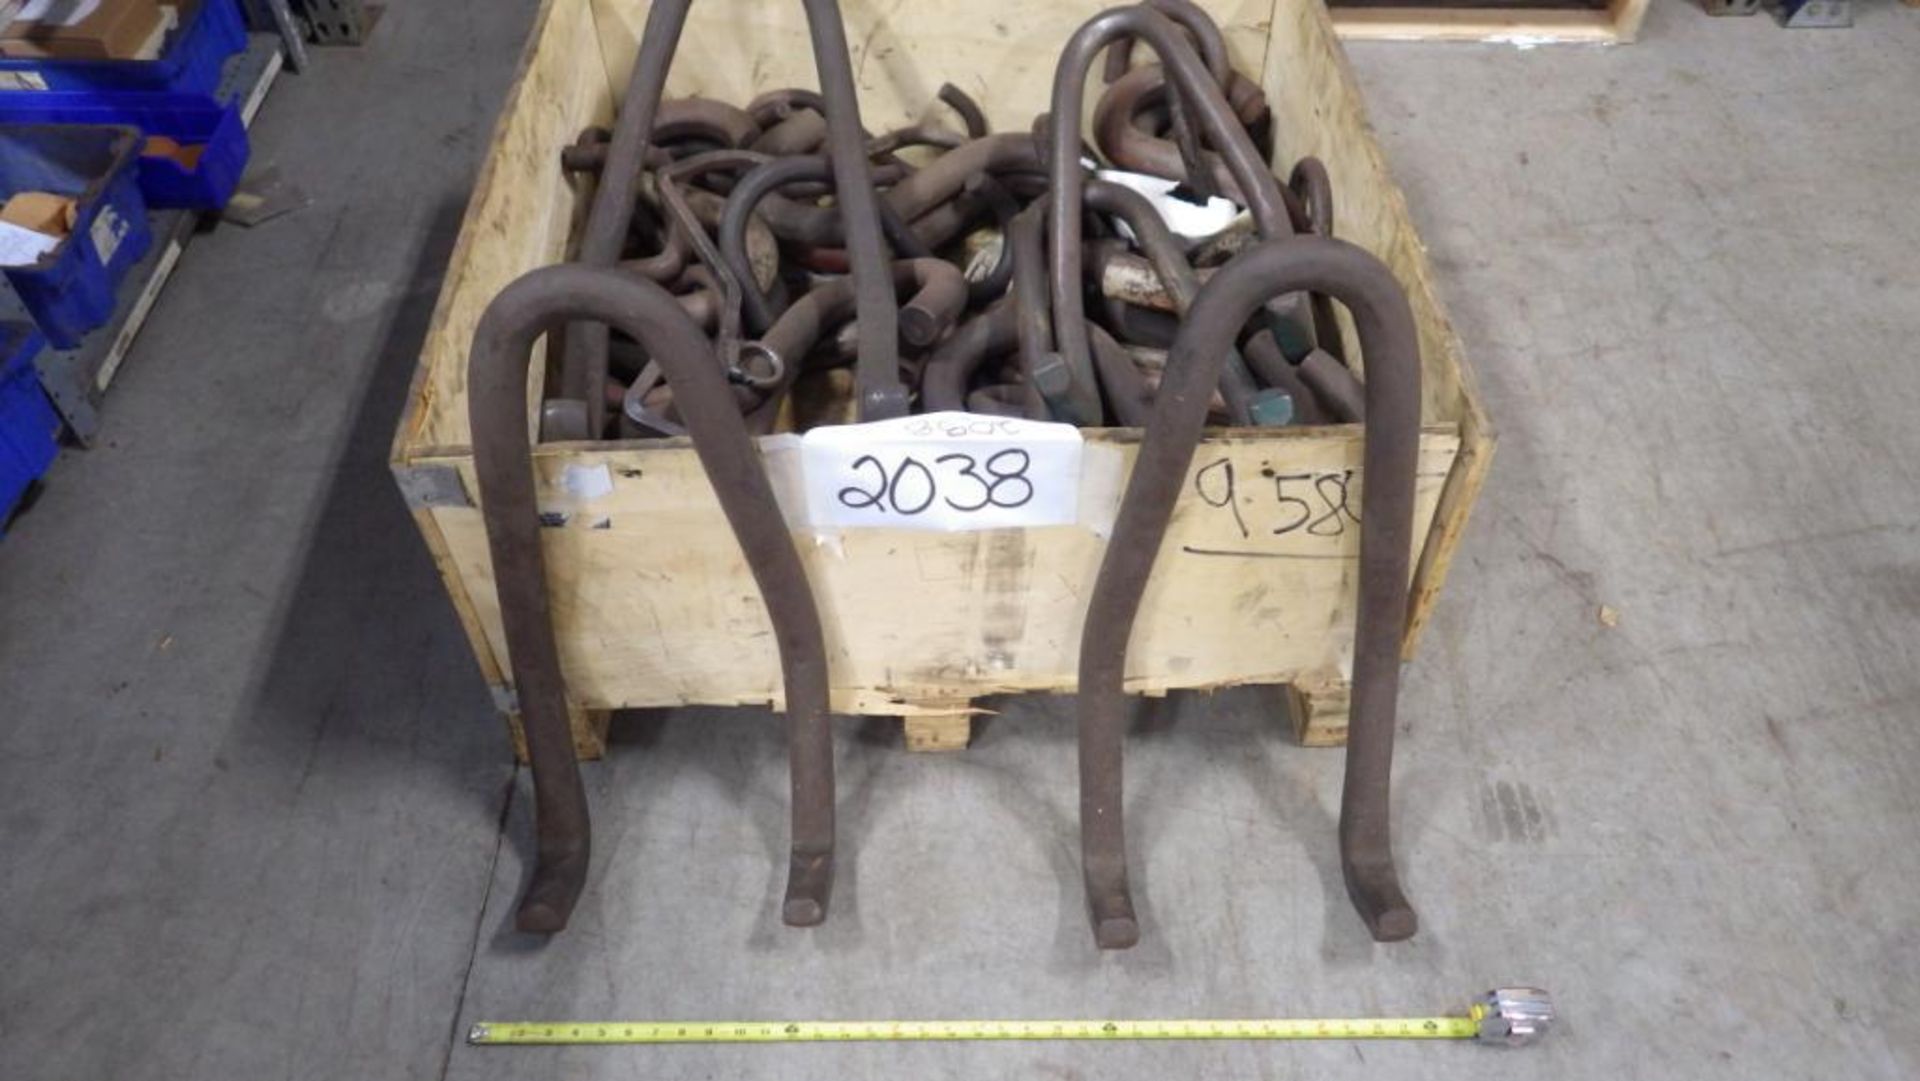 Lot c/o: Assorted Sized Large "S"-Hooks and Plate Hooks in ine box skid